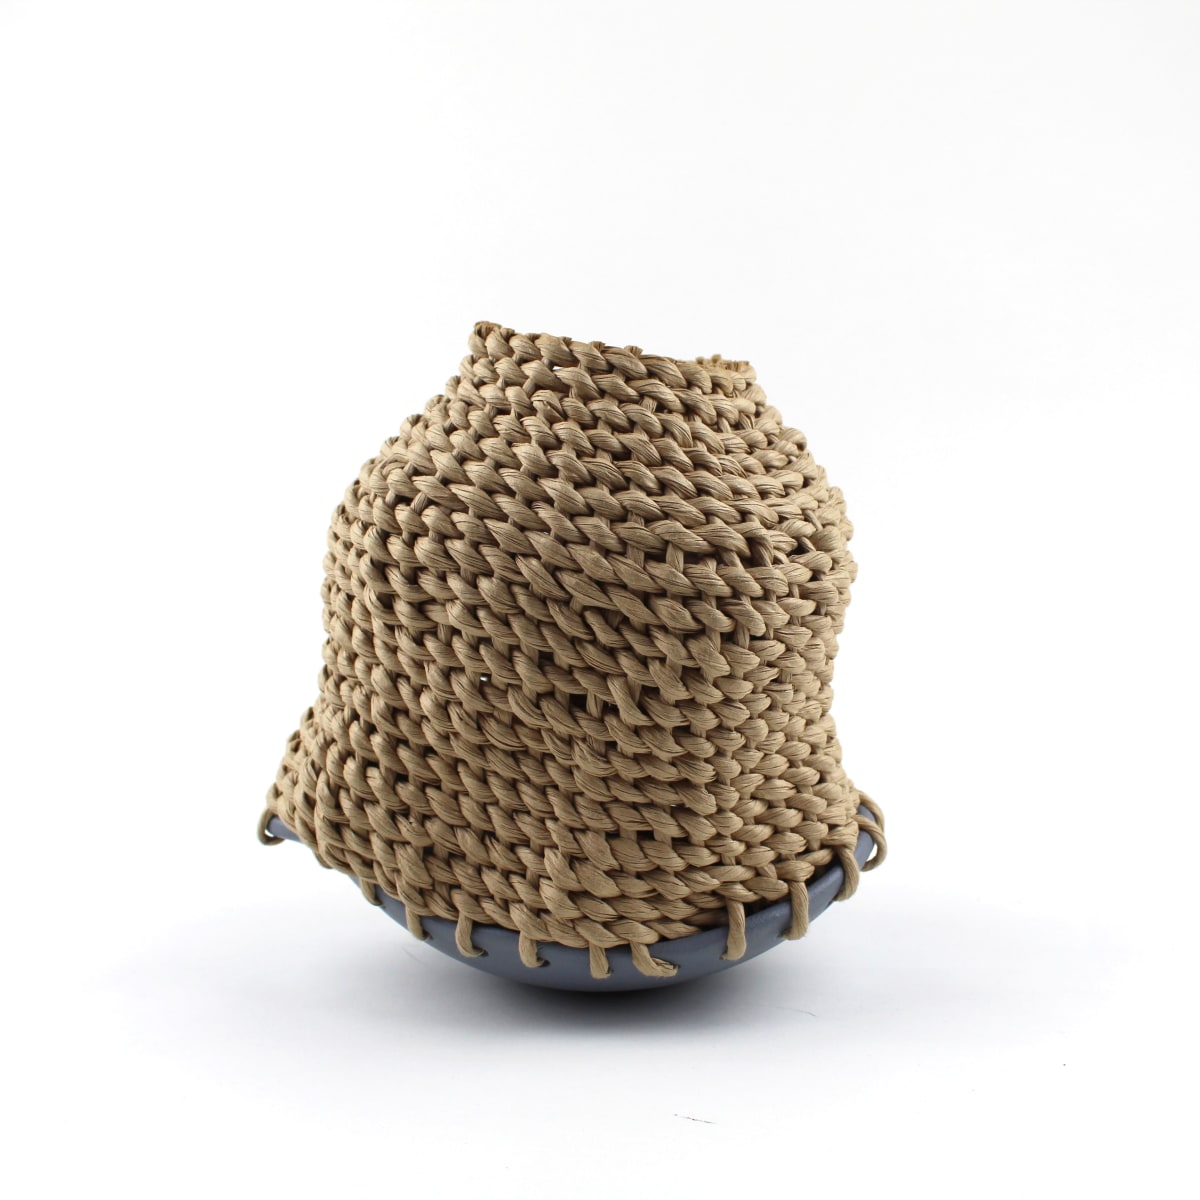 Basketpot VIIII by Essa Baird  Image: A collection of hand built ceramic bottoms paired with basket weaving technique tops. Using different weaving types + materials such as fiber rush, yarn, and twine.